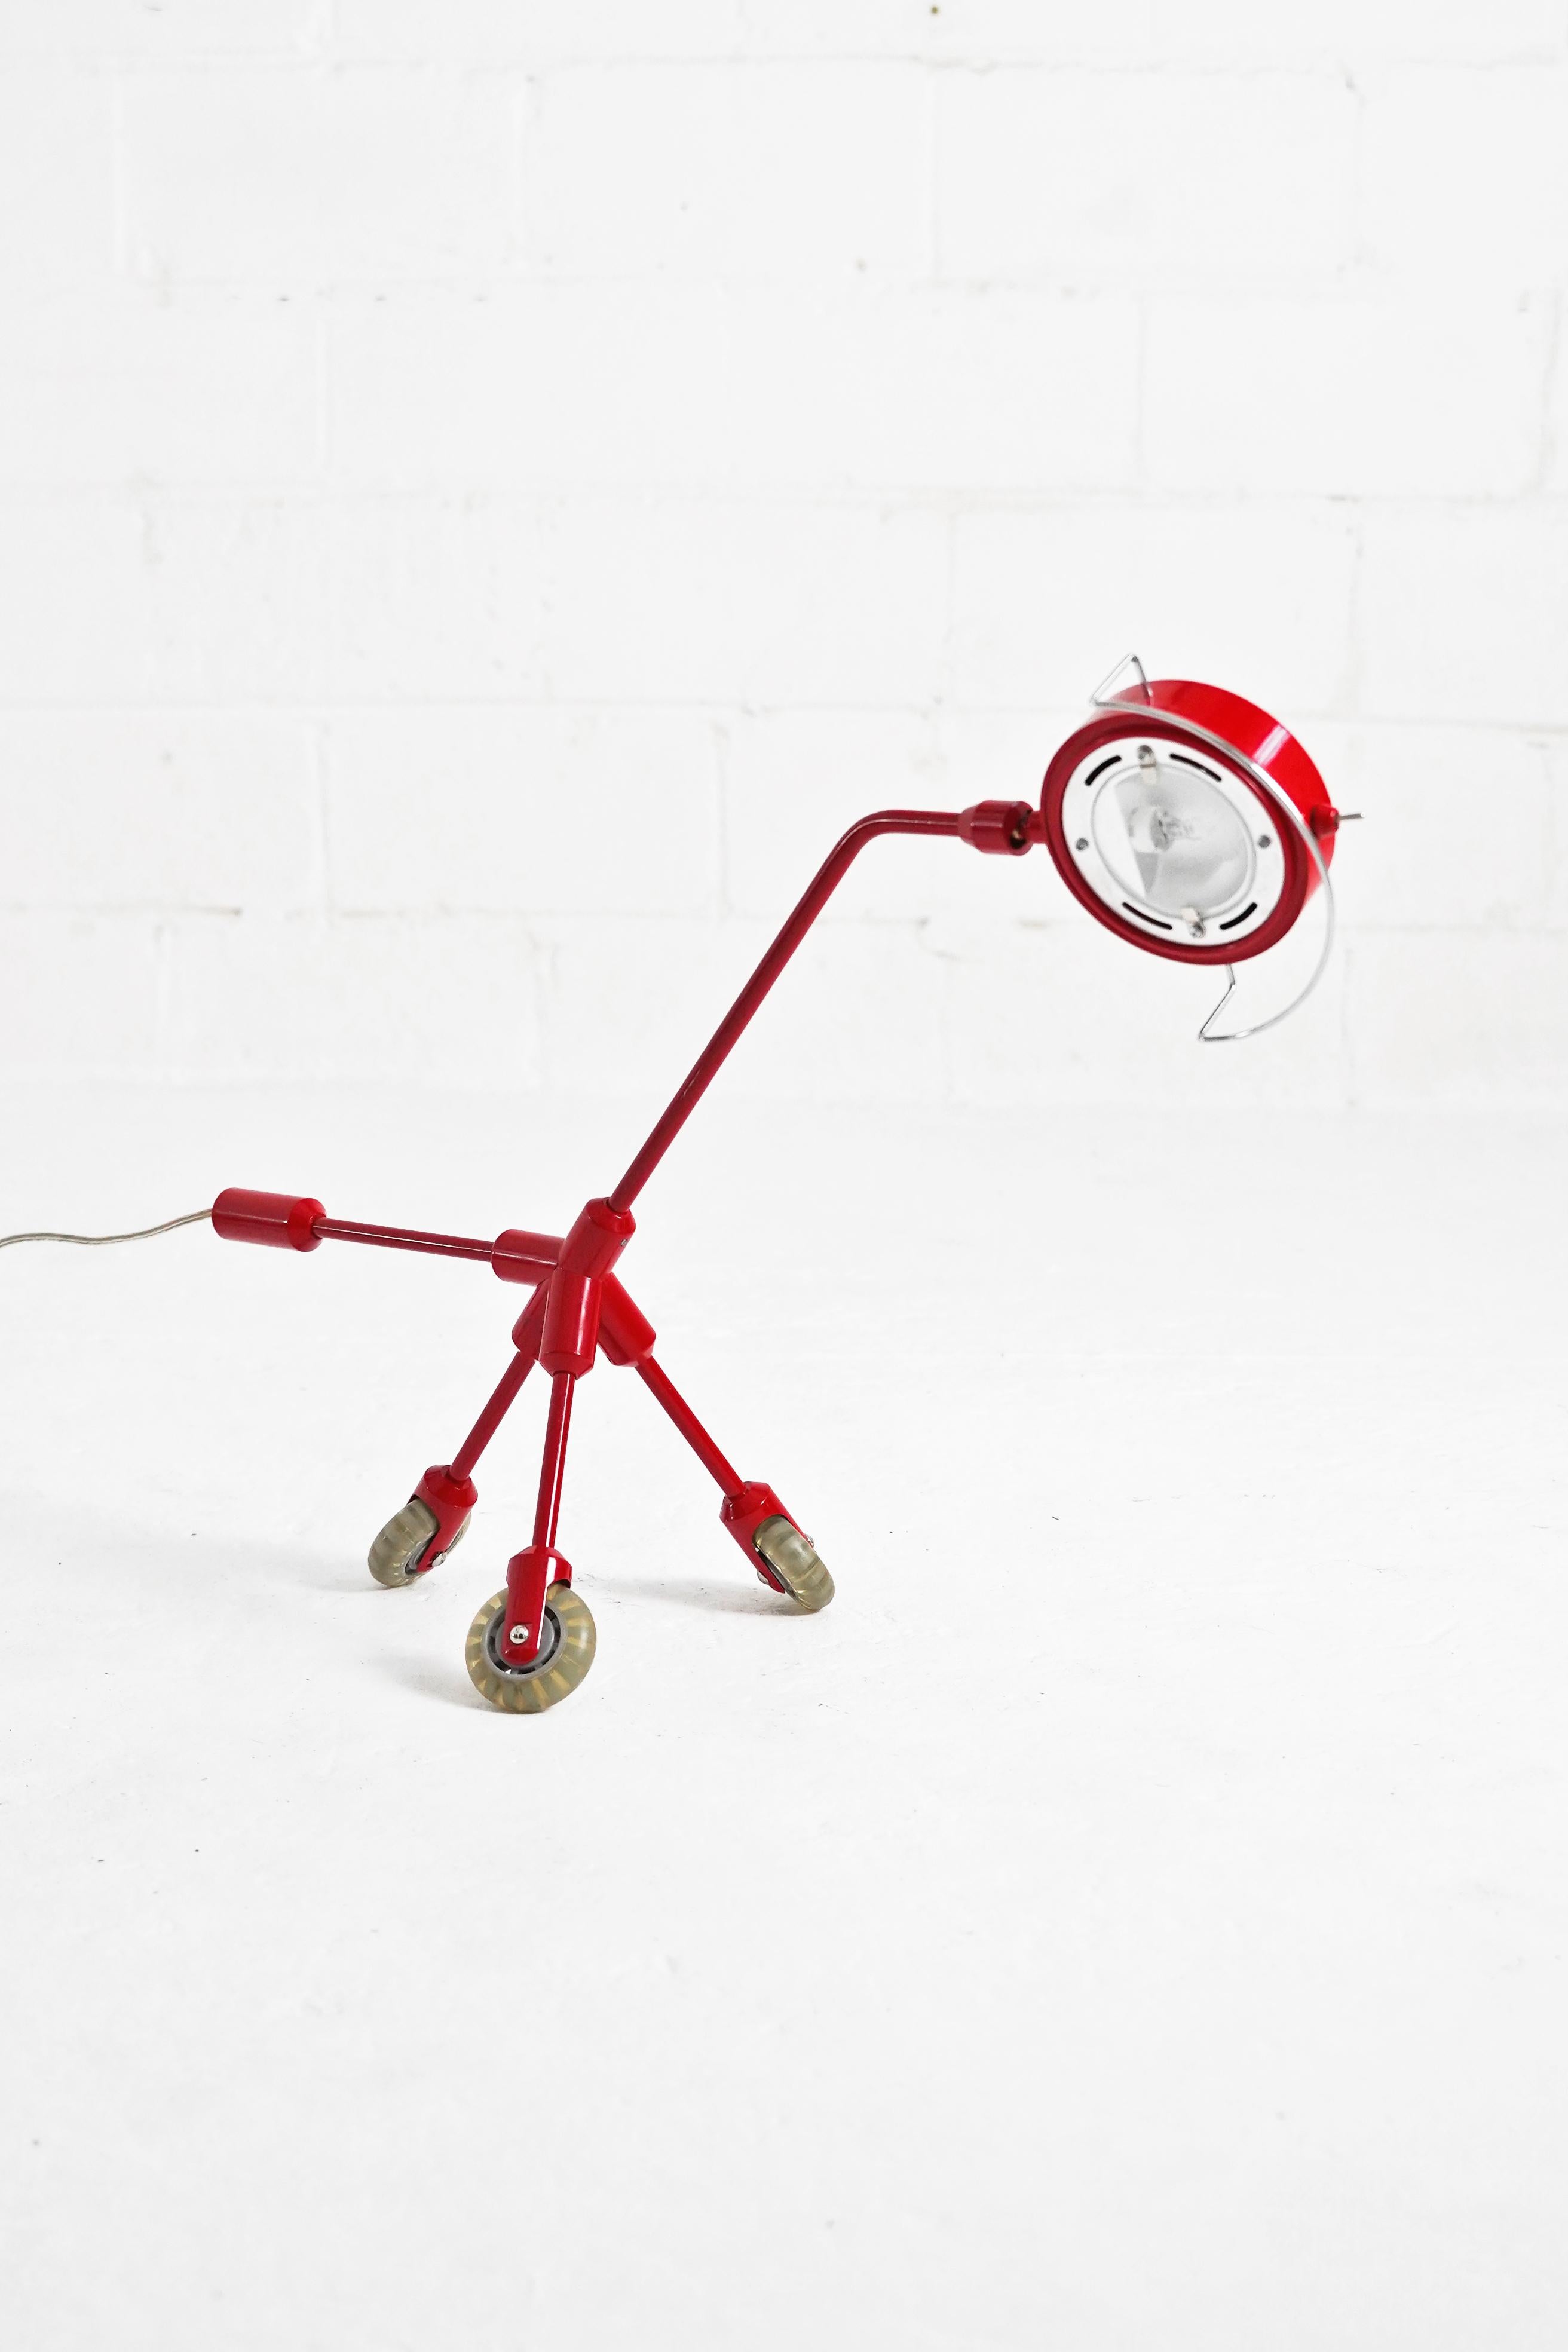 Amazing Kila vibrant red dog rolling table lamp designed by Harry Allen for IKEA. In great vintage condition, working perfectly with American 2-prong plug. Fixture is able to rotate for users needs, shown in photos, as well as roll with tripod base